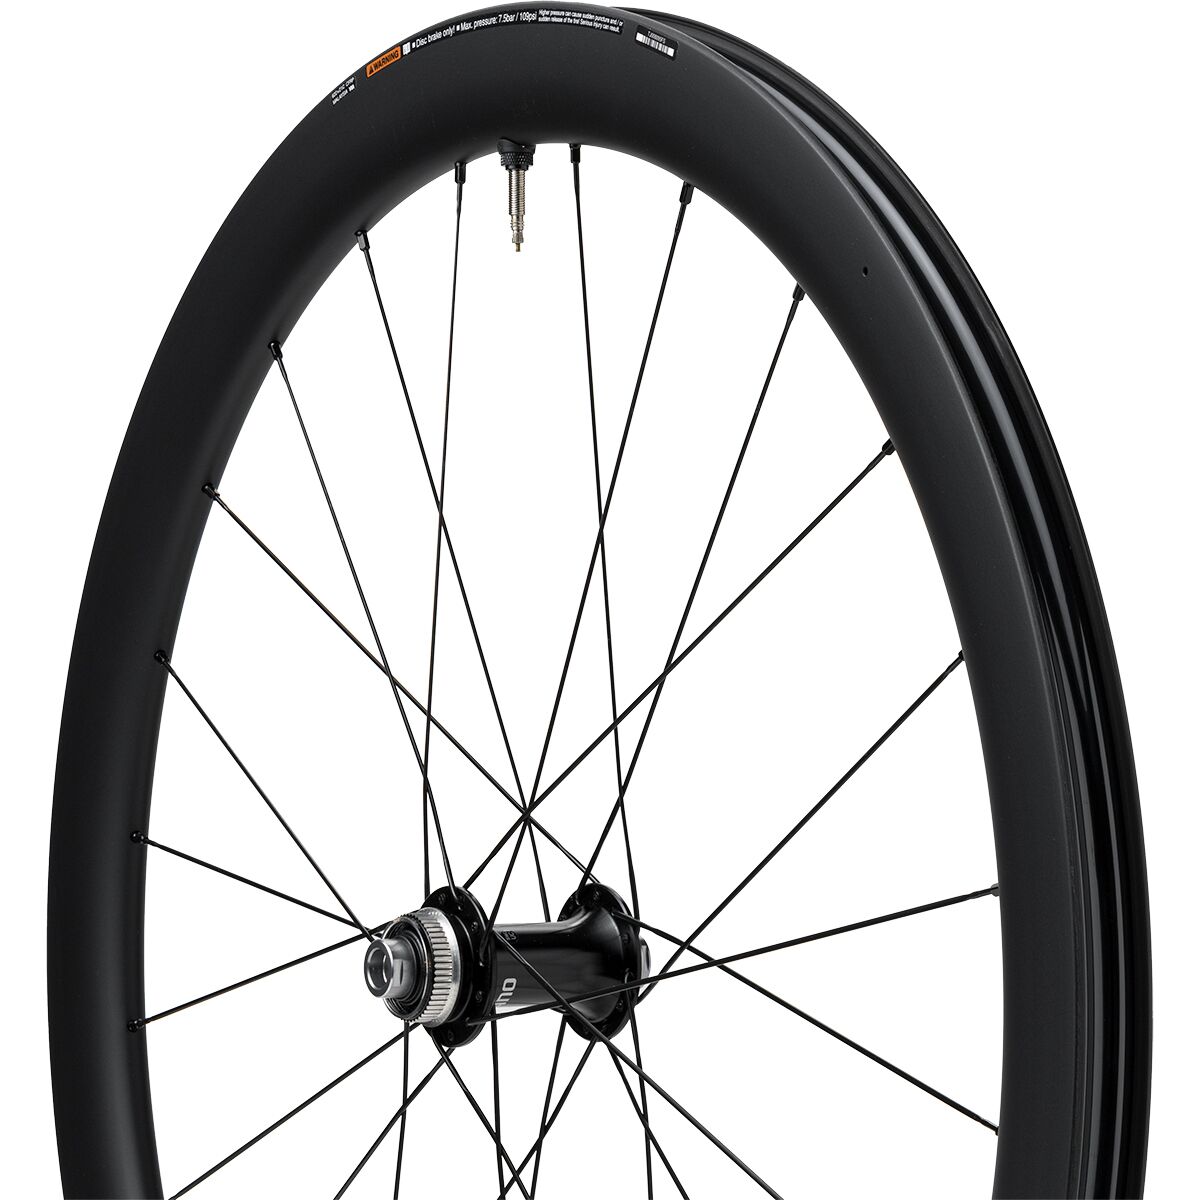 Shimano 105 WH-RS710 C46 Carbon Road Wheelset - Tubeless